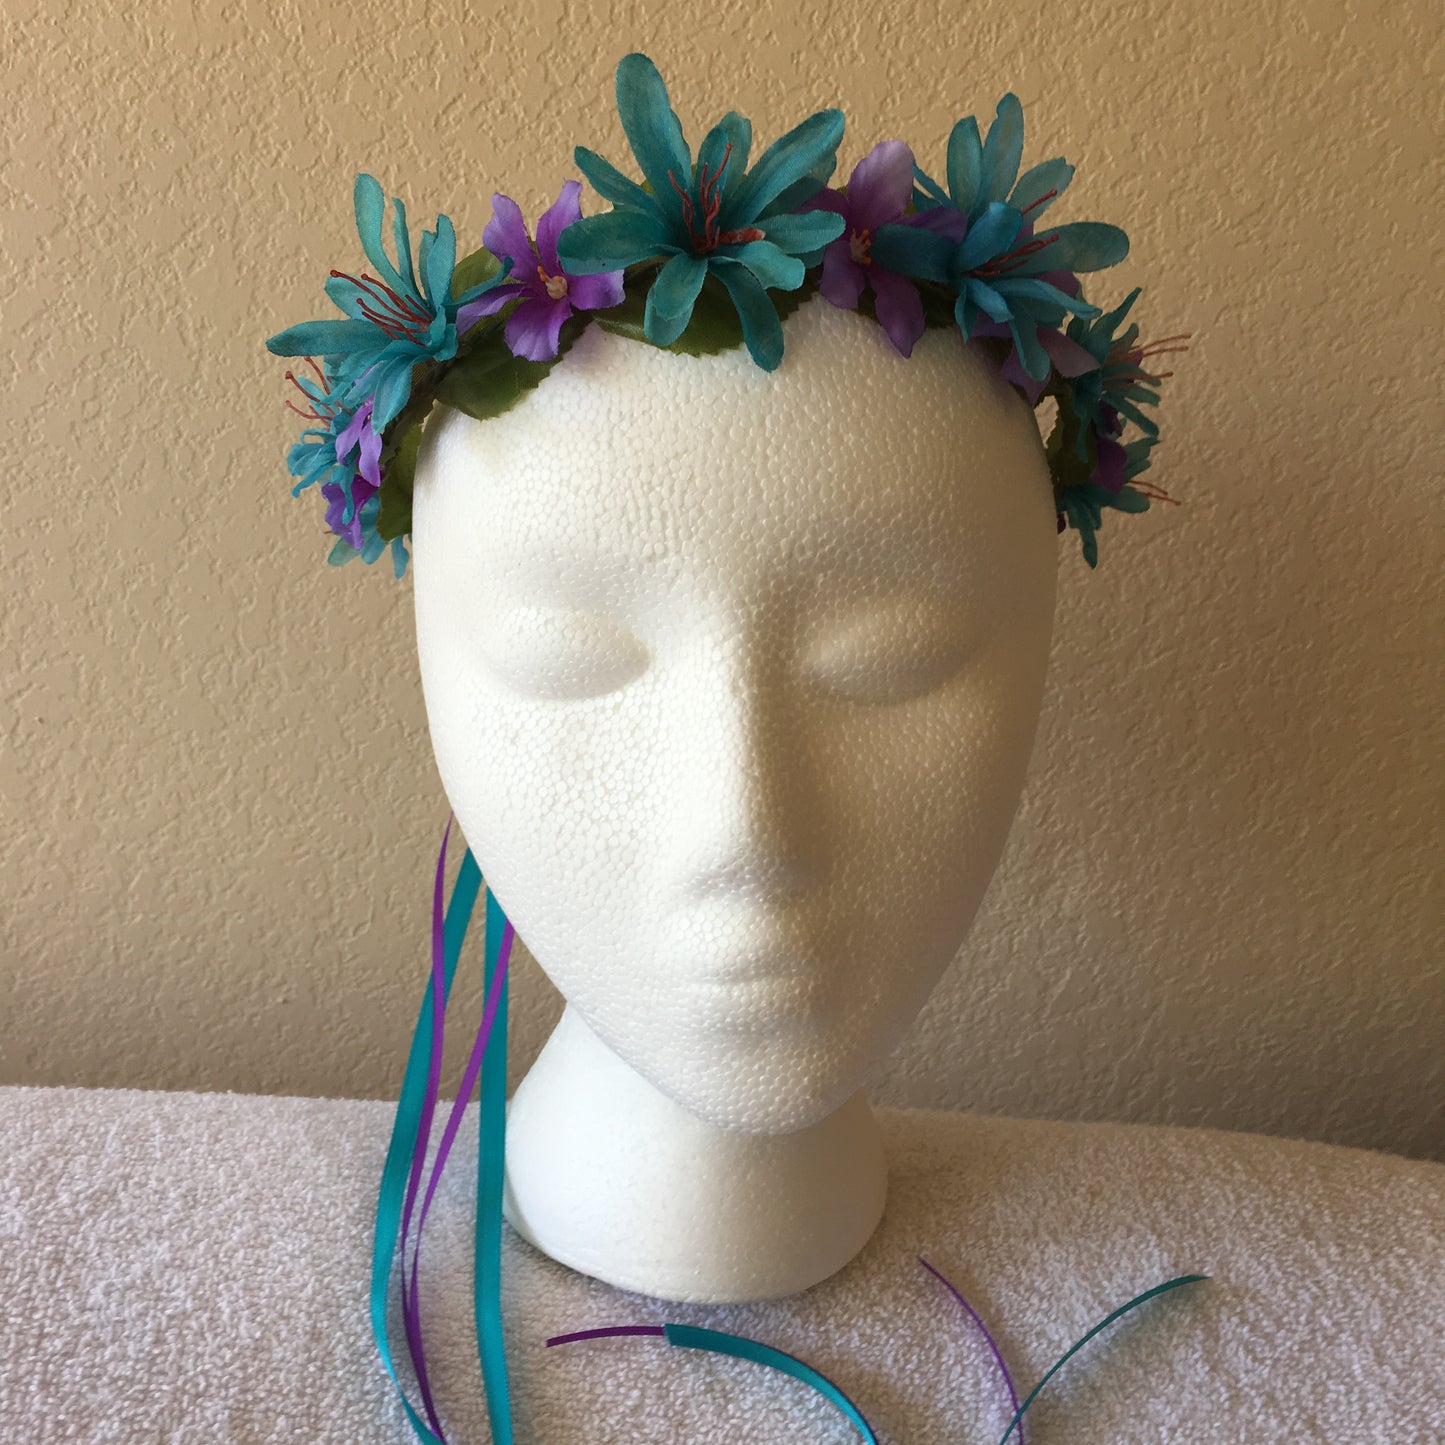 Extra Small Wreath - Teal & purple flowers +